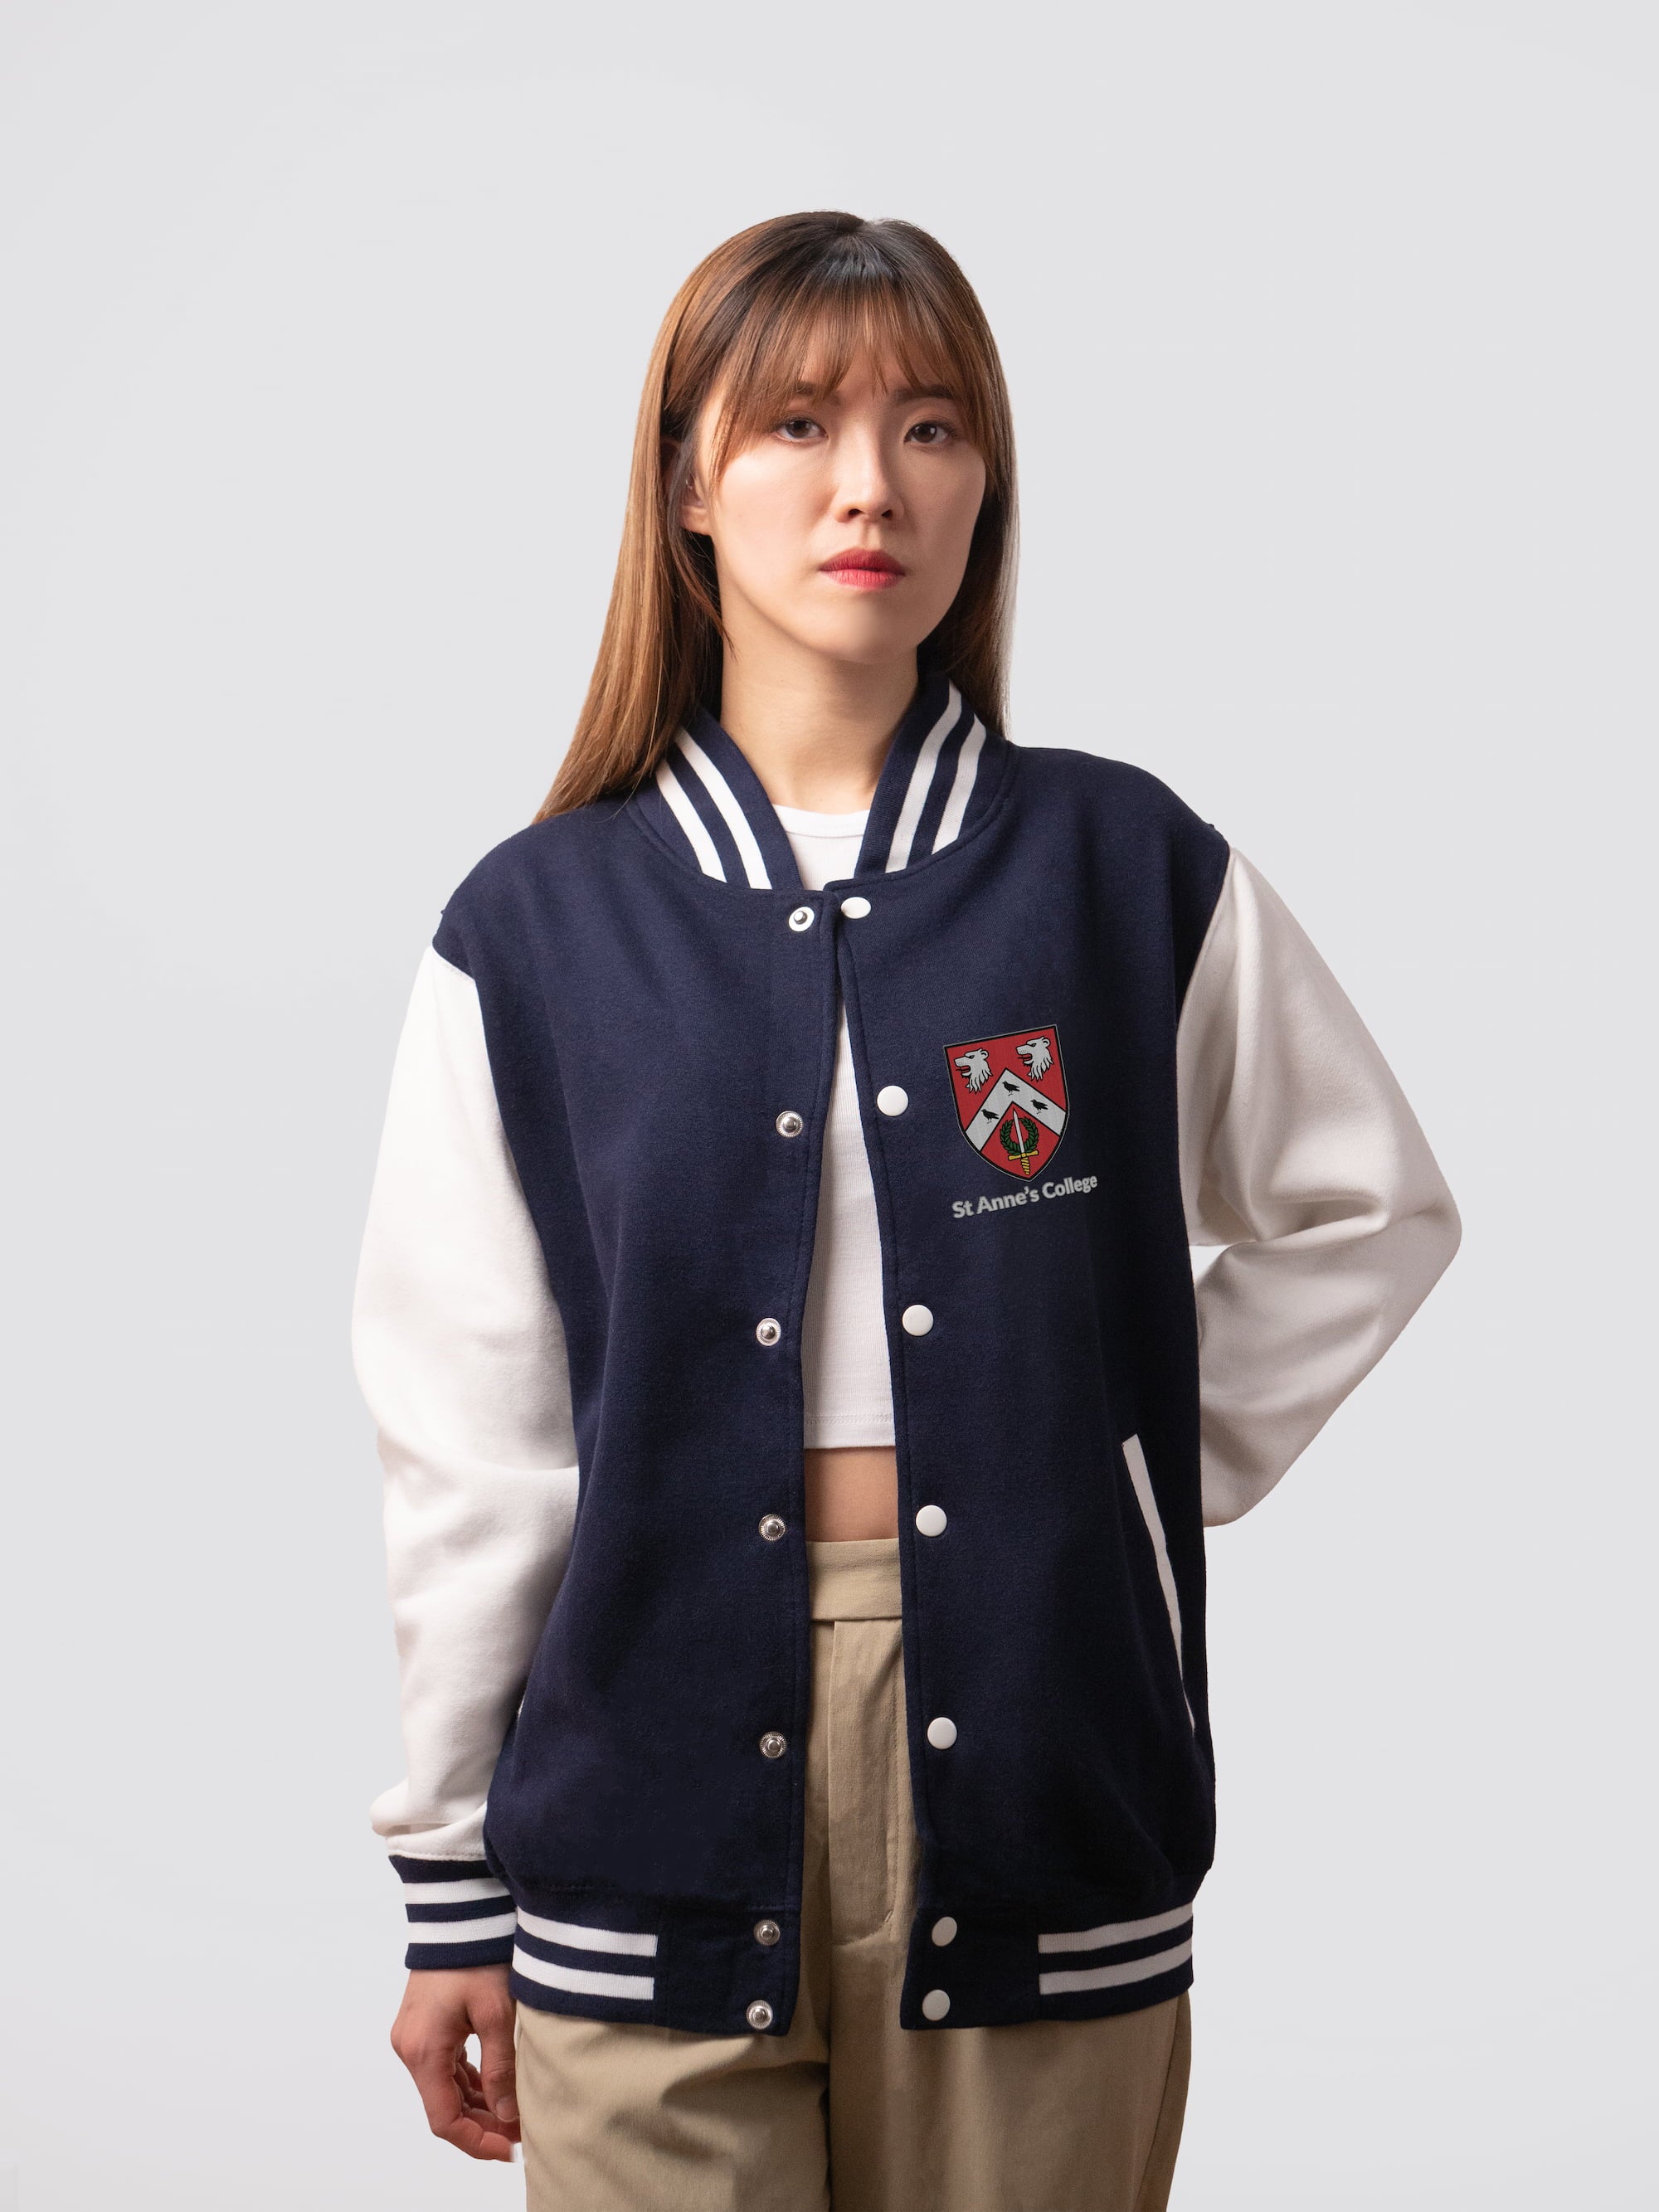 Retro style varsity jacket, with embroidered St Anne's crest